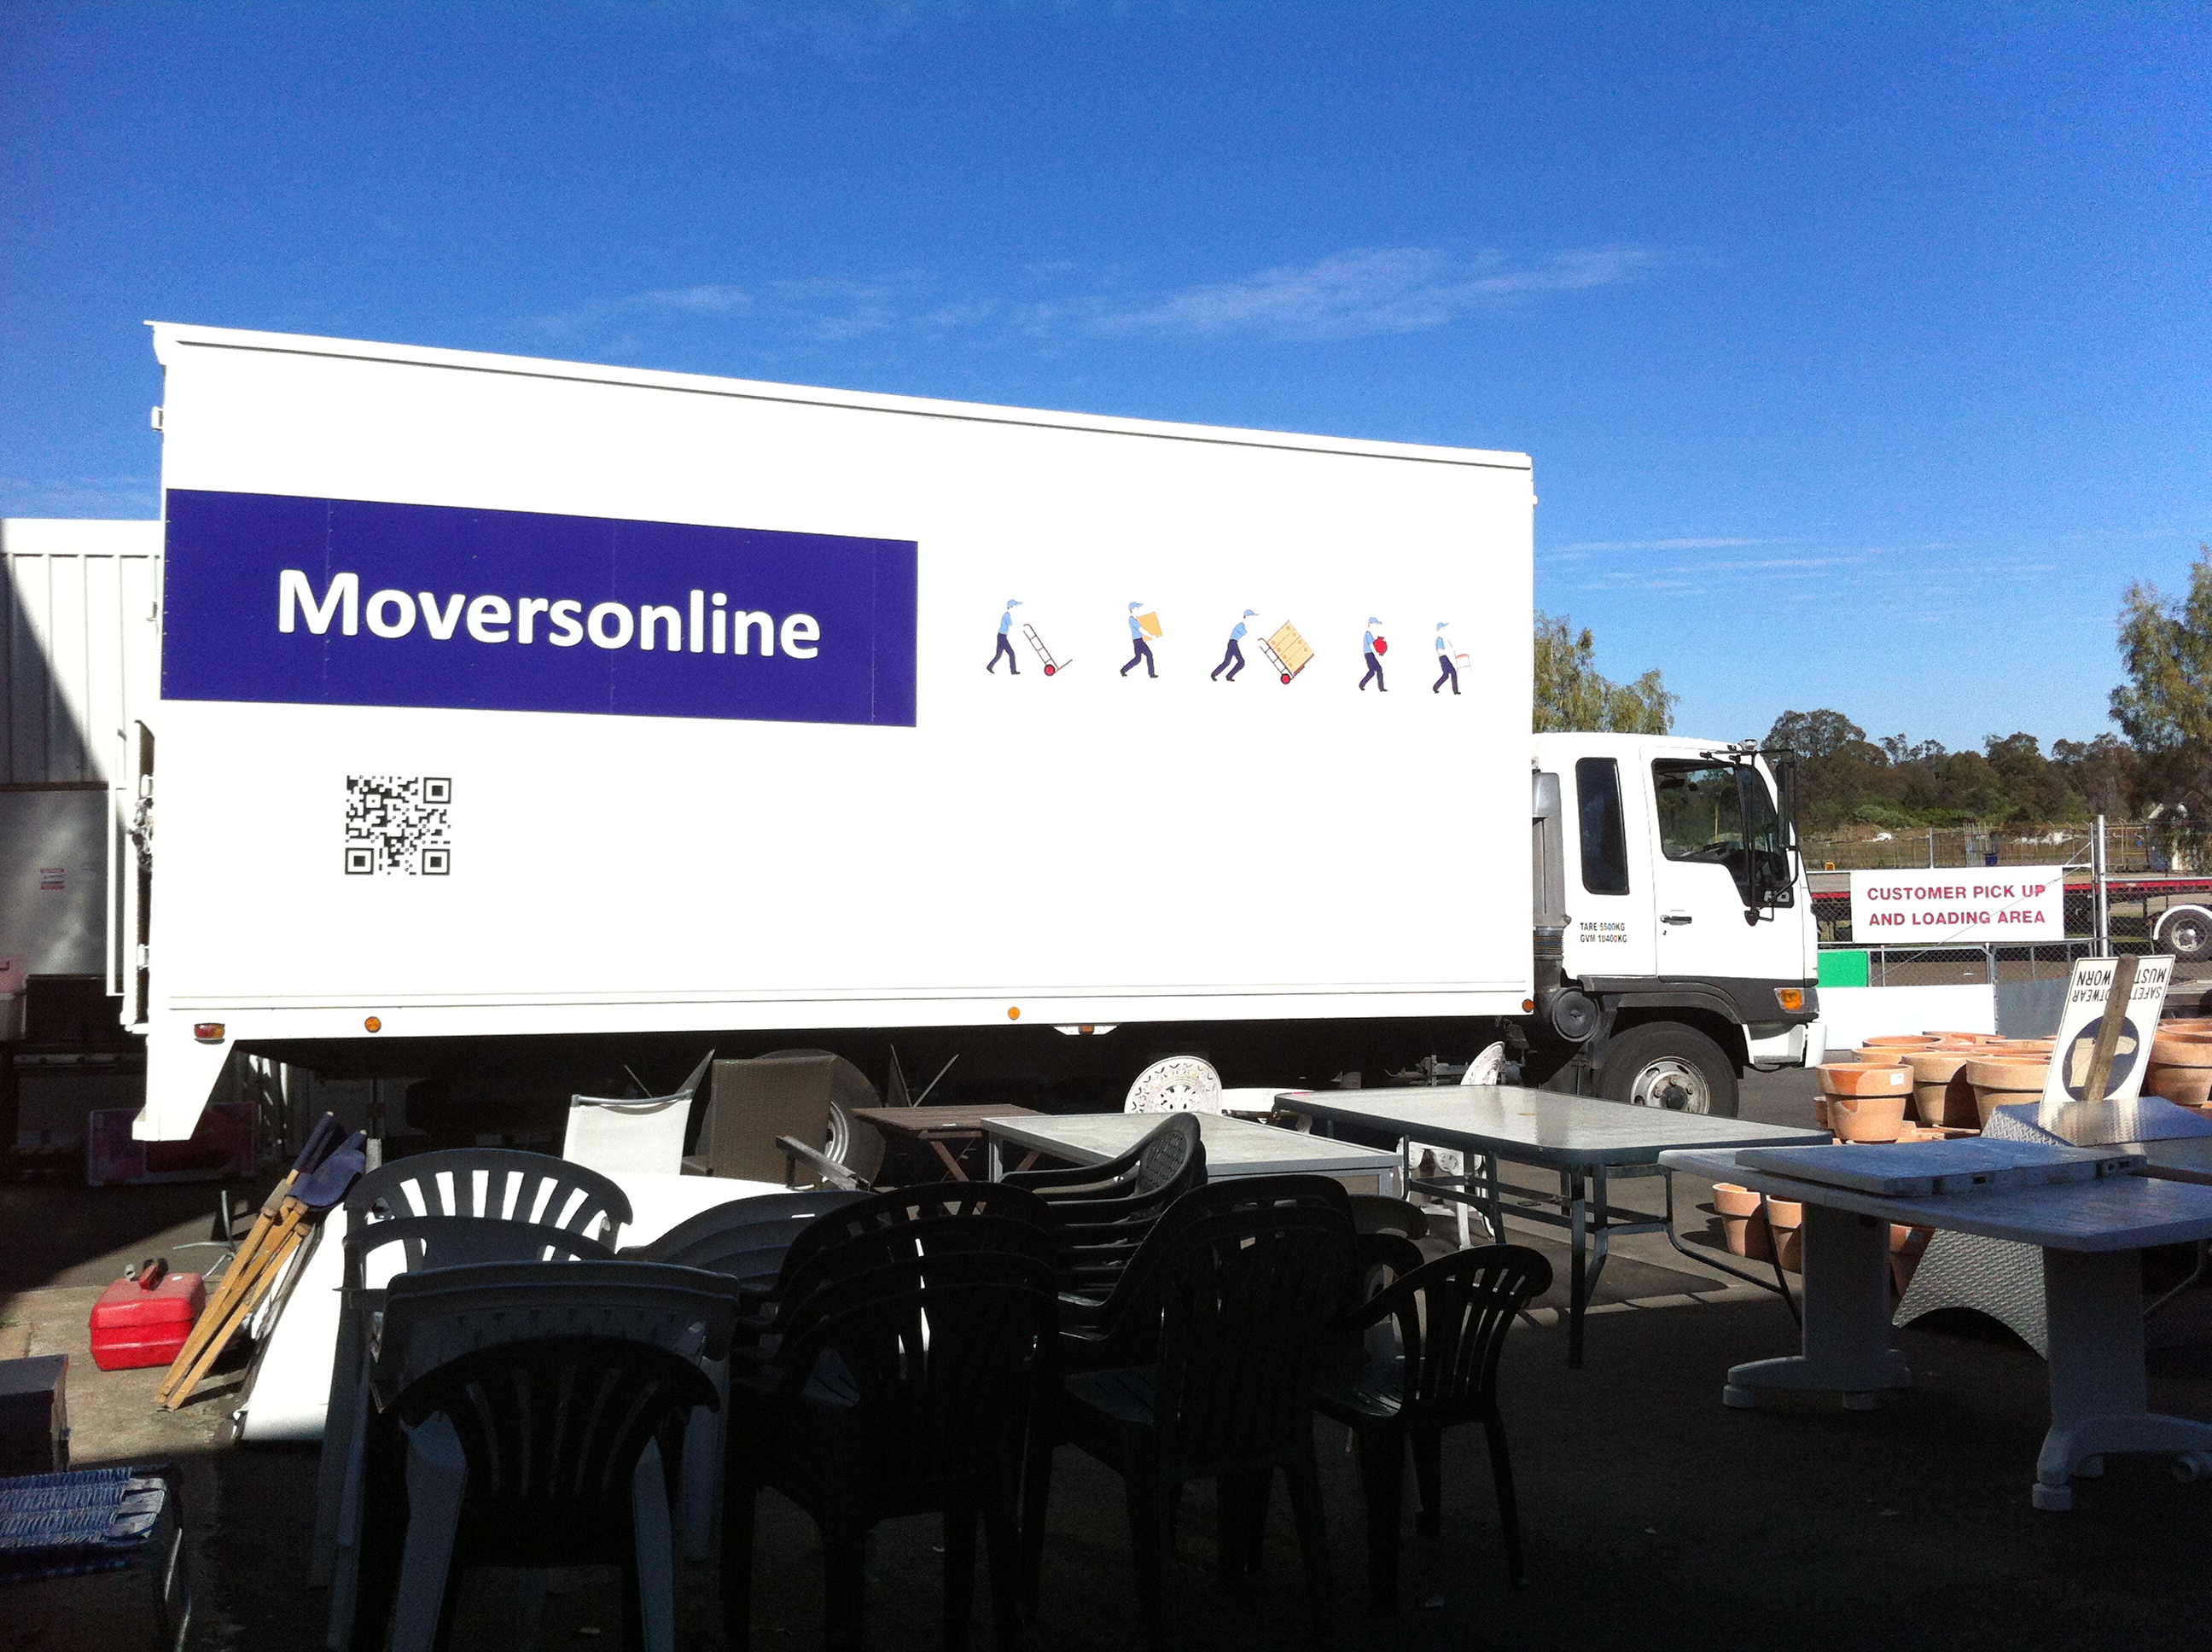 Movers Online